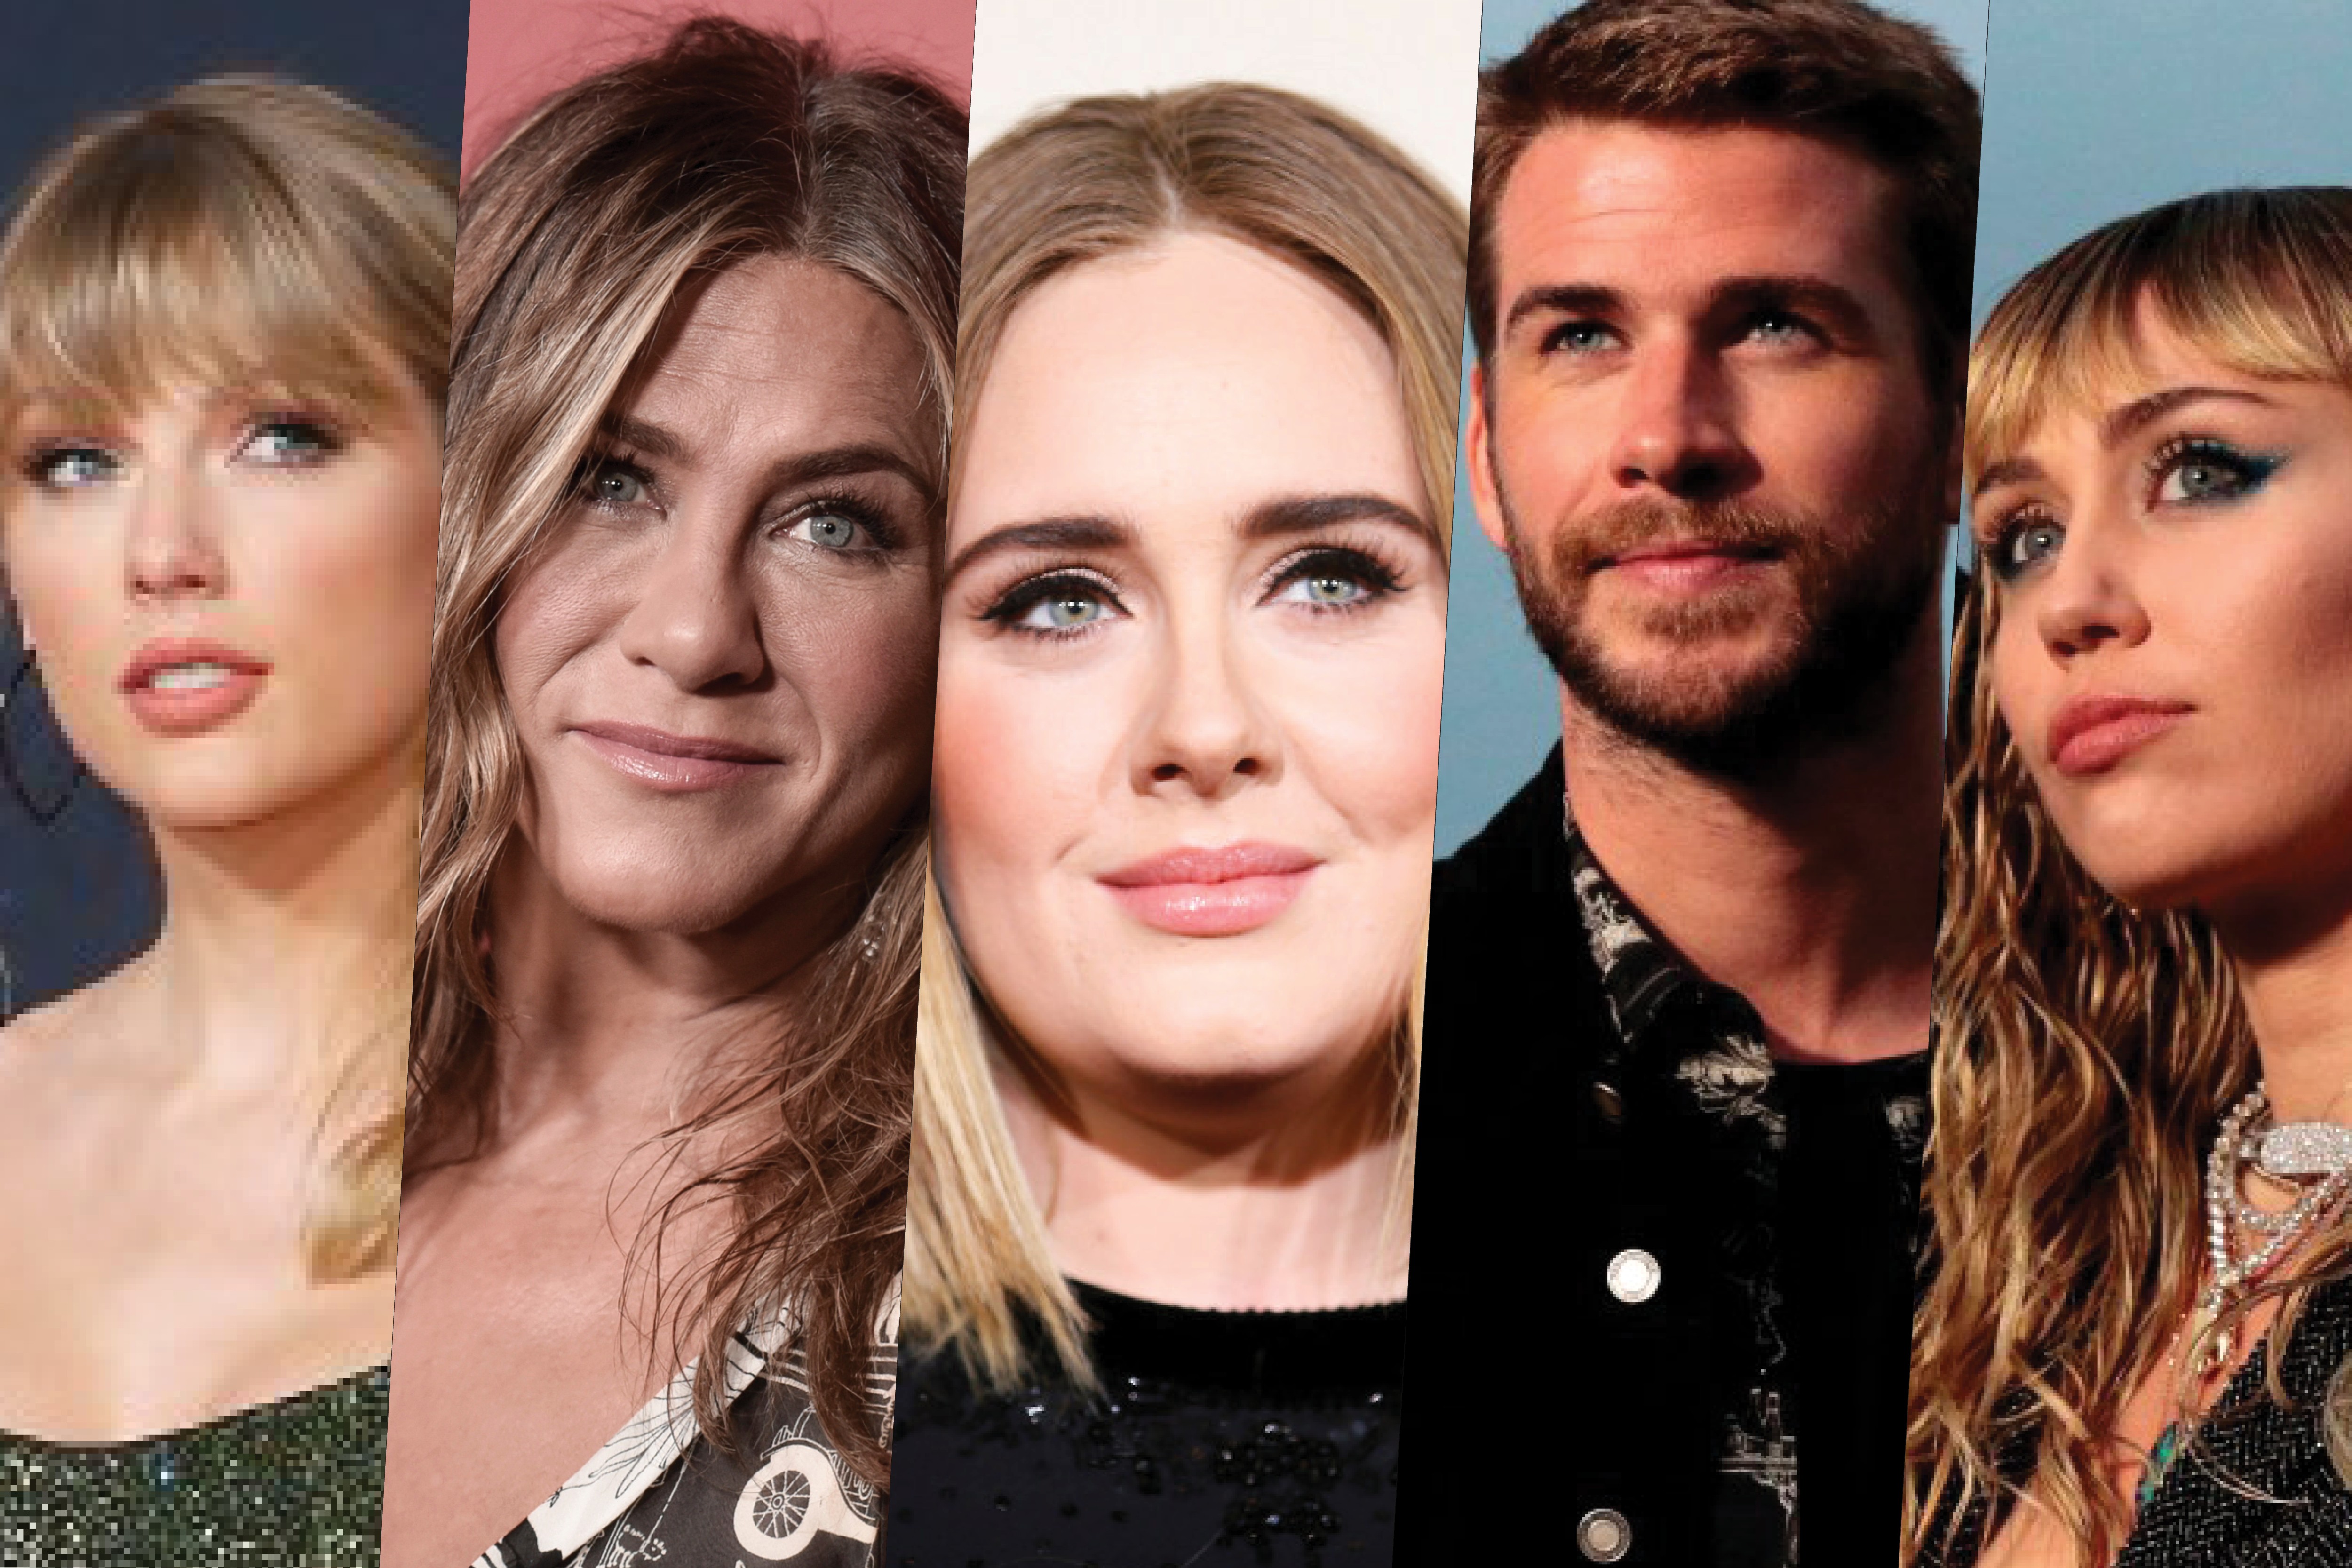 Taylor Swift, Jennifer Aniston, Adele, Liam Hemsworth and Miley Cyrus all made headlines in 2019 – and not necessarily for the right reasons.